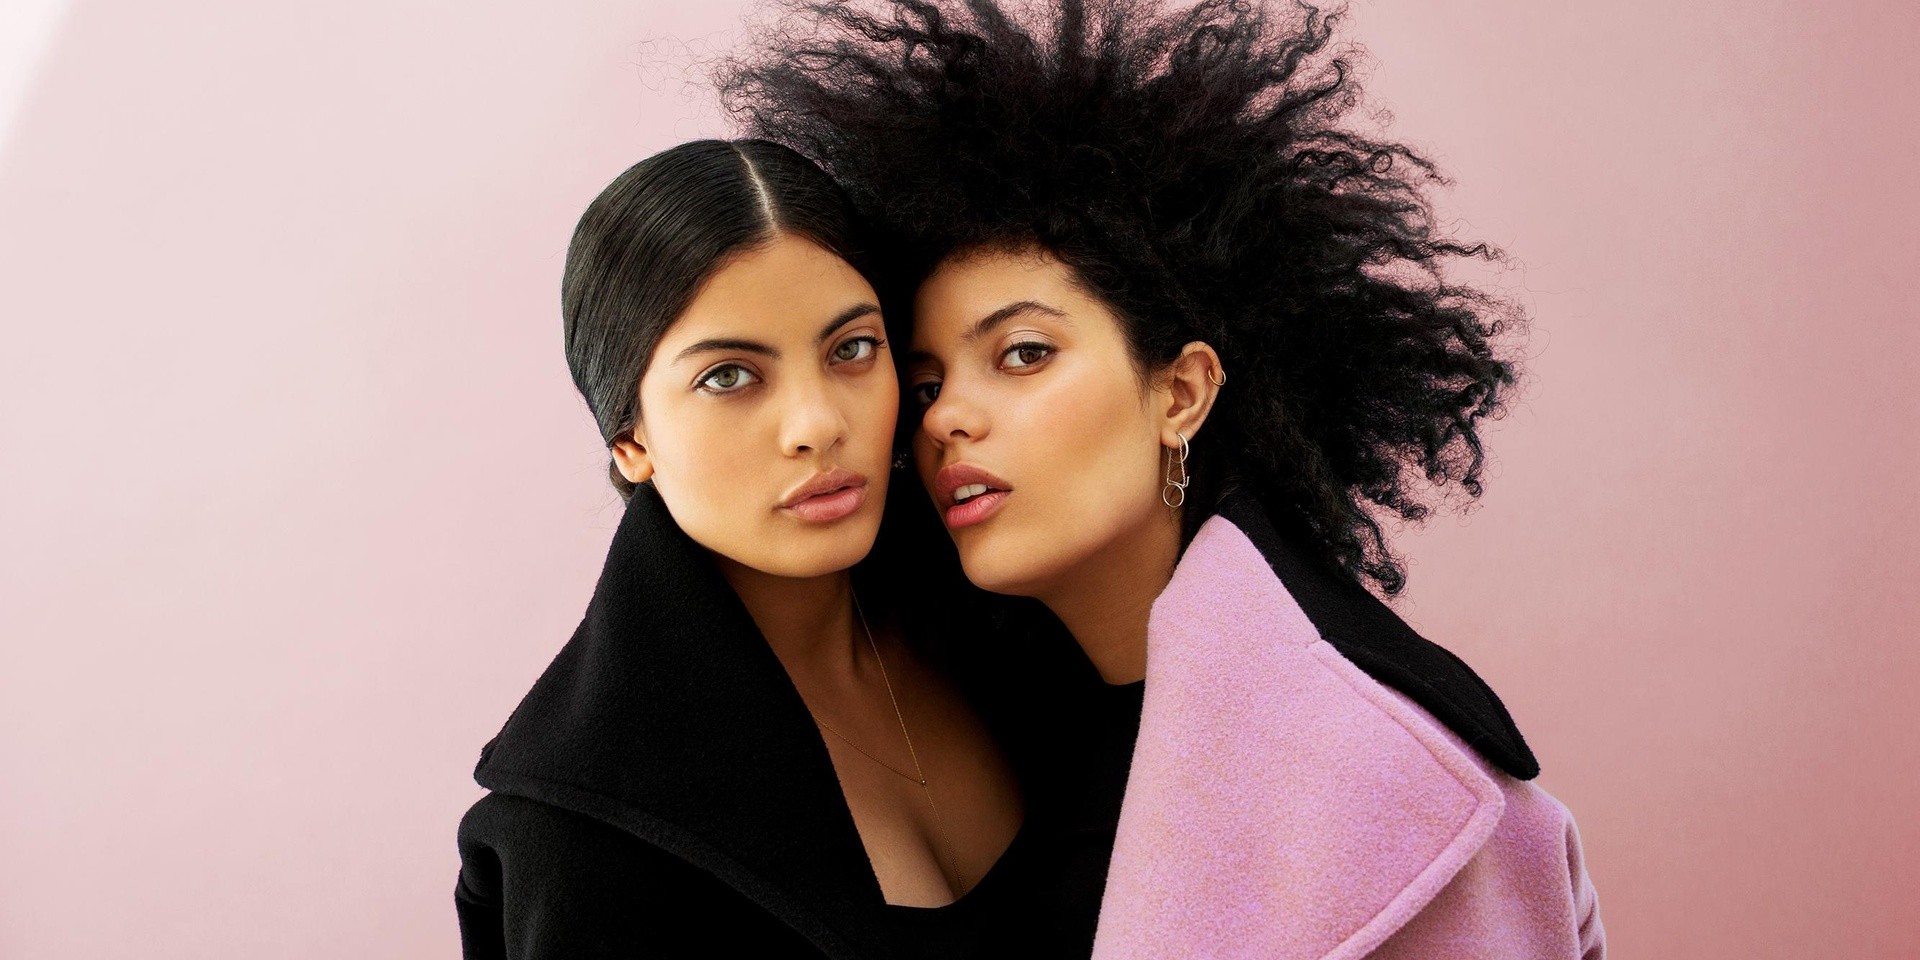 IBEYI to perform in Singapore this April 